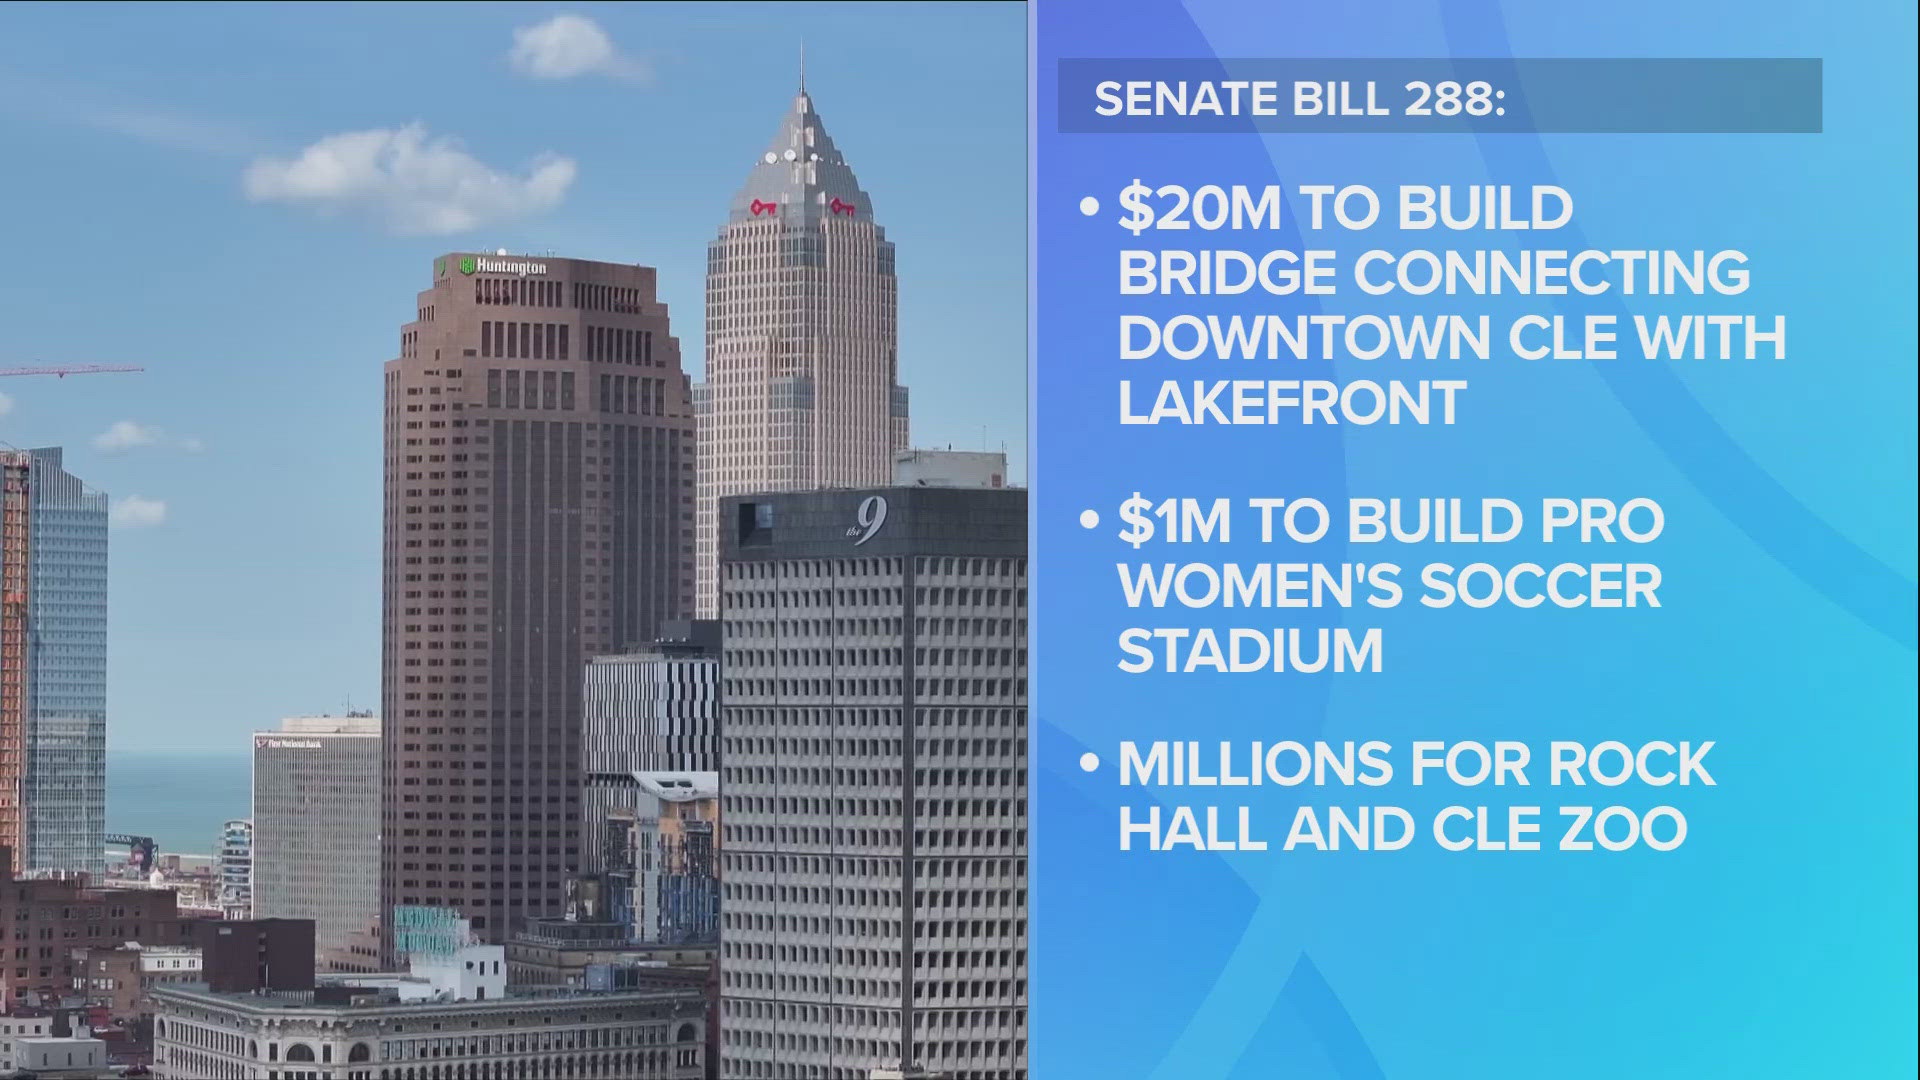 The bill, sponsored by Sen. Matt Dolan, also features millions for the Rock & Roll Hall of Fame's renovation and the modernization of the Pro Football Hall of Fame.